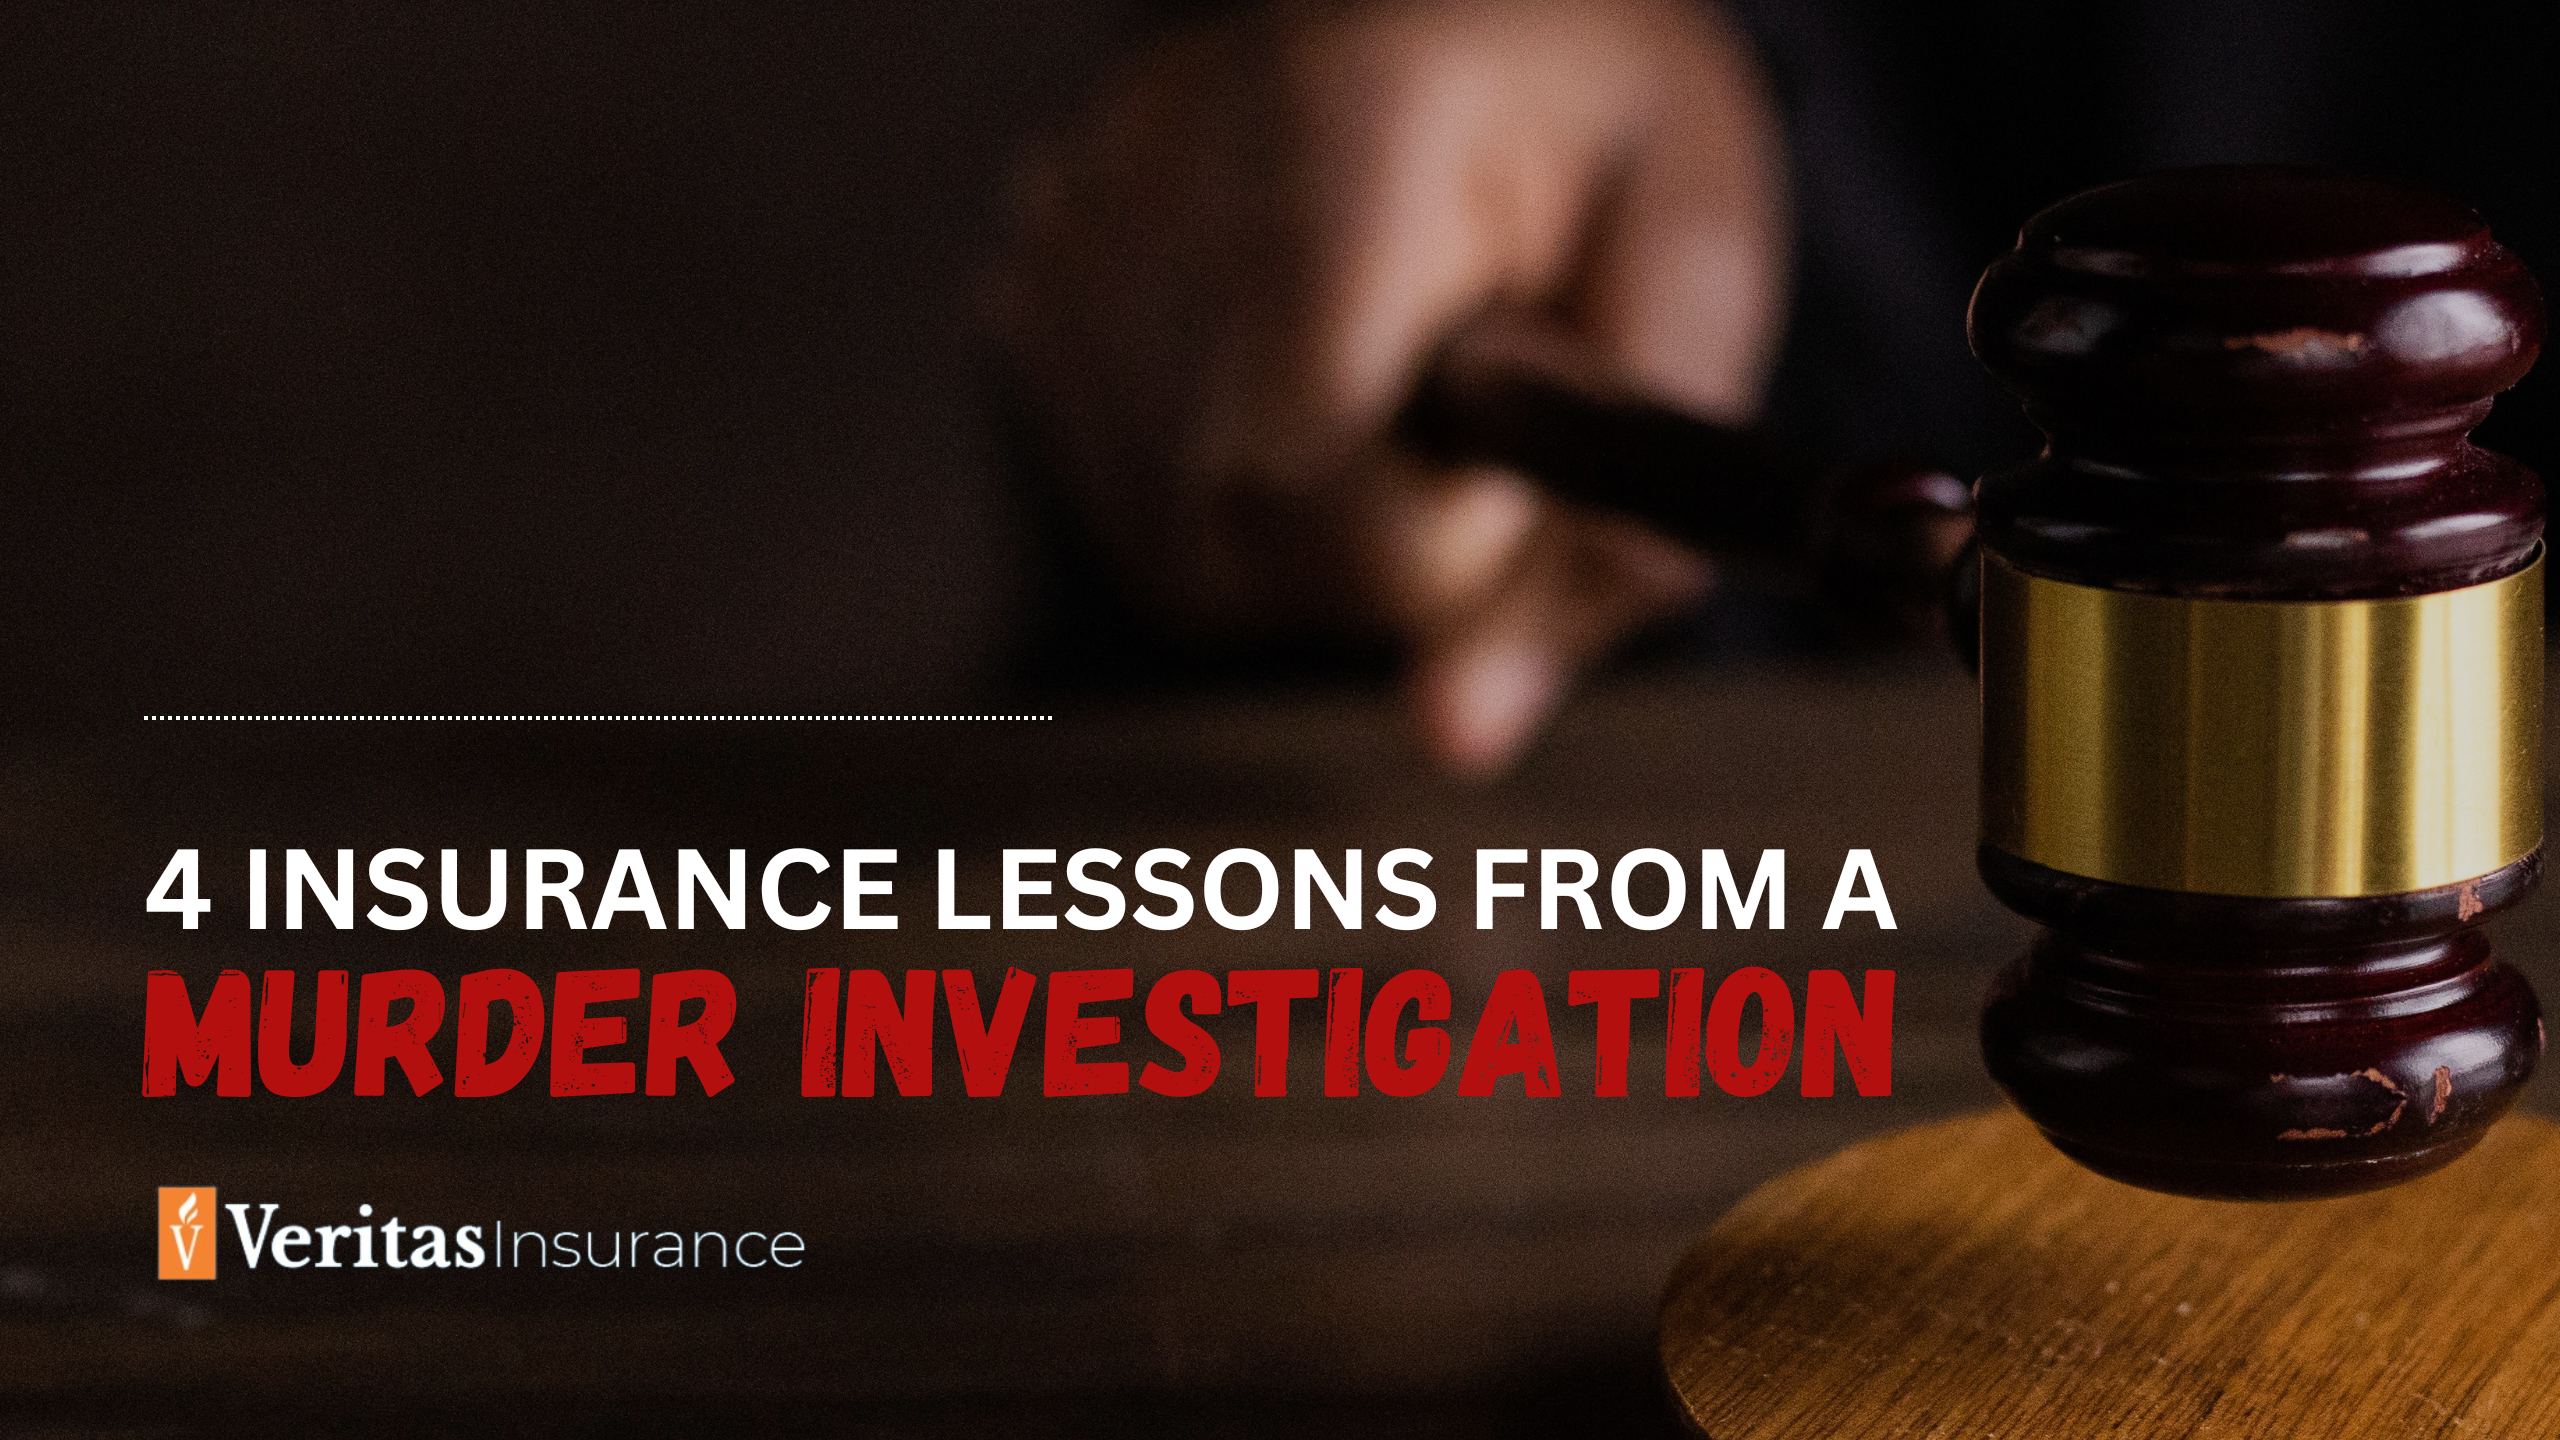 Insurance lessons from a murder investigation - Spectrum